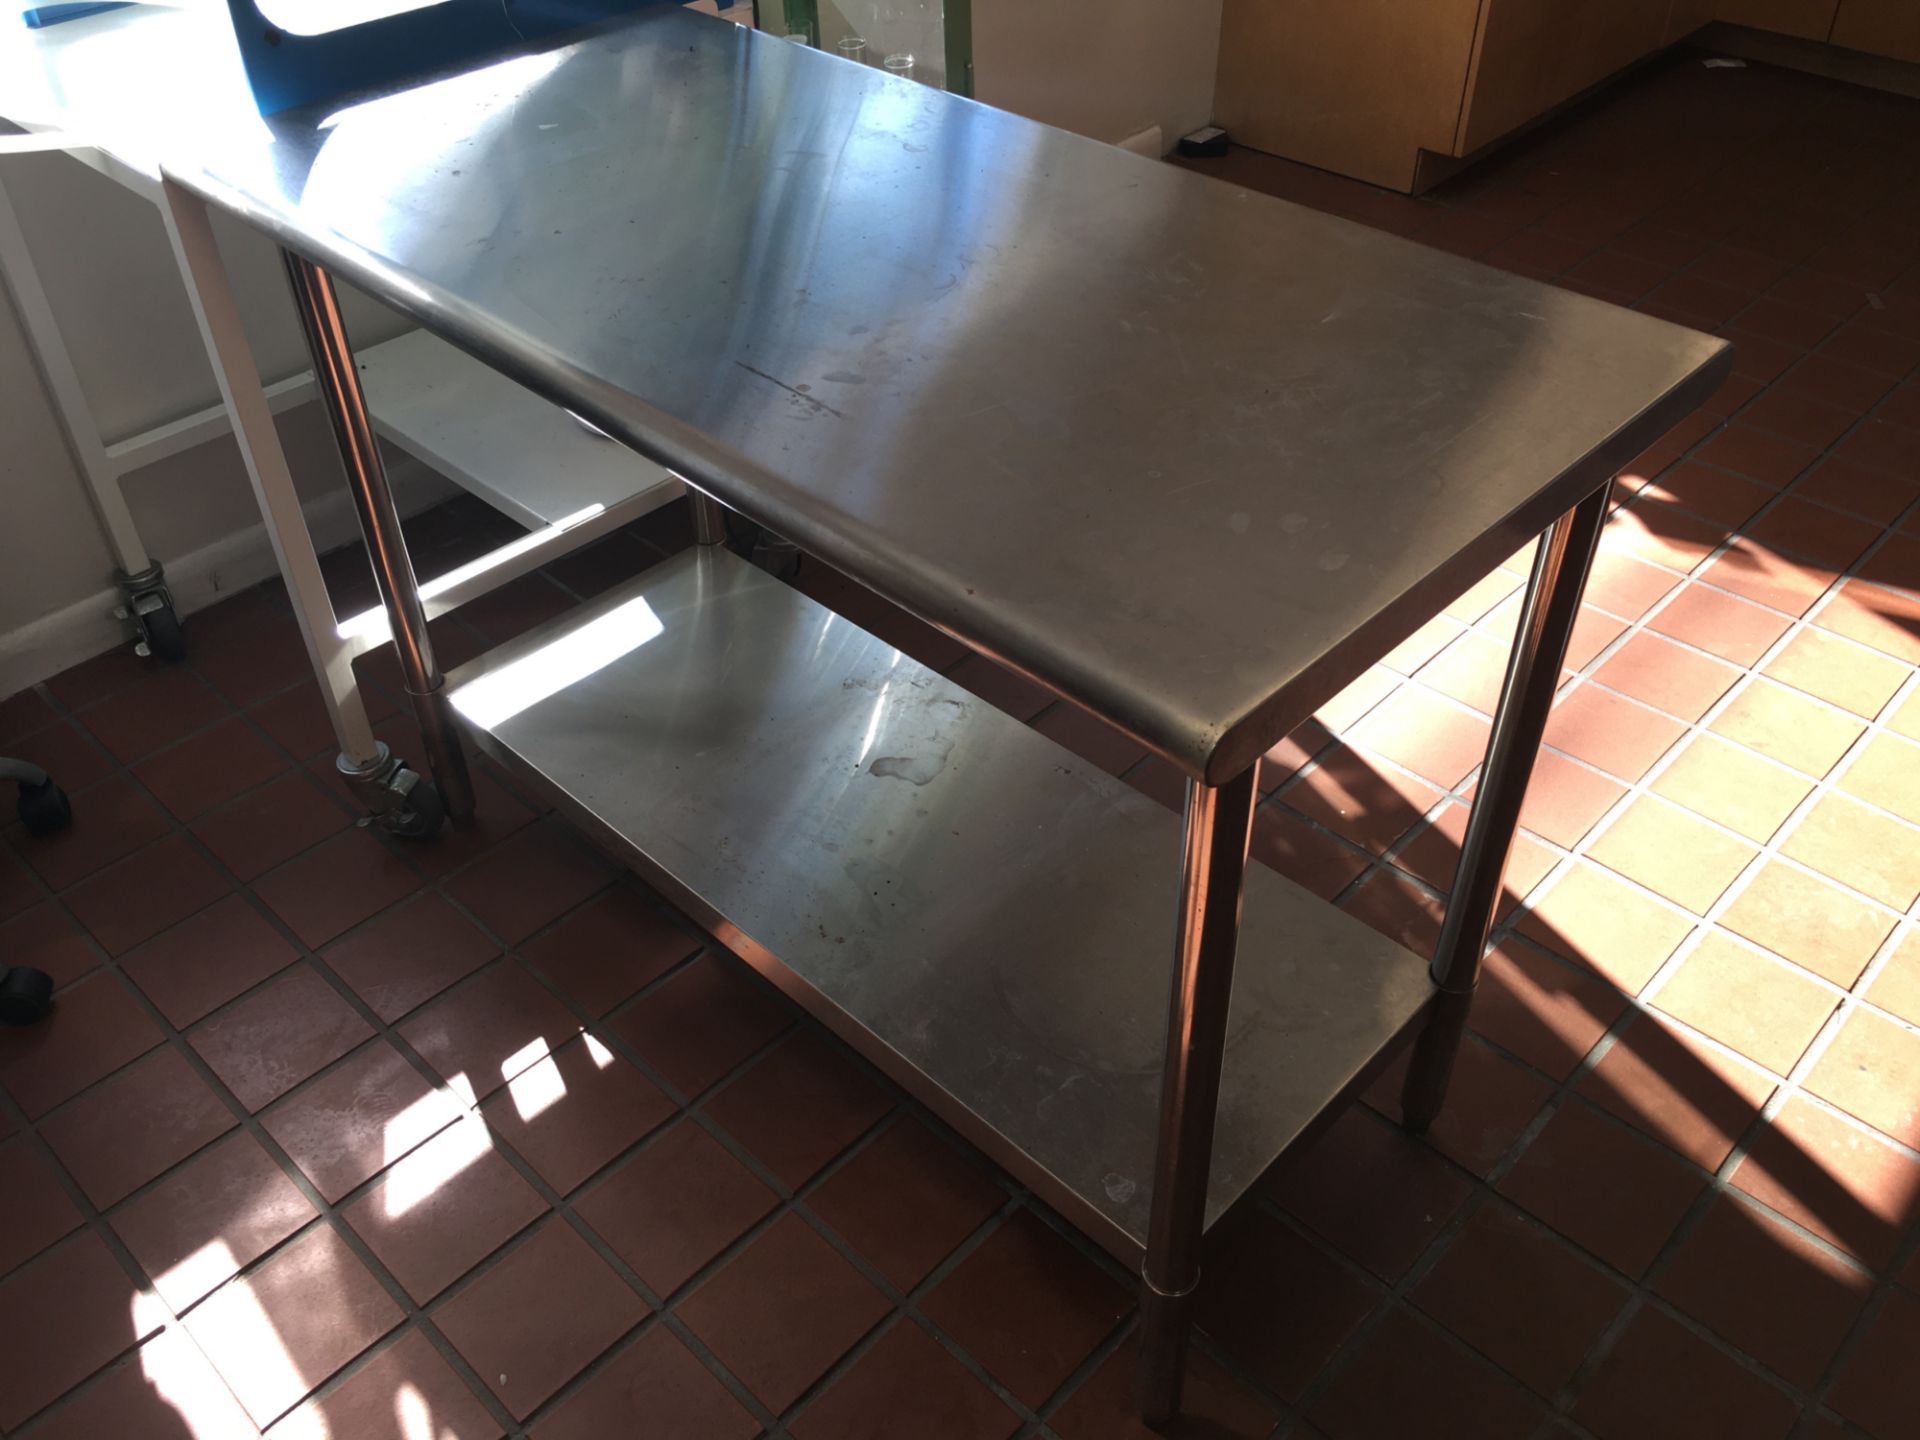 Trinity, 4-Foot Lab Table, Stainless Steel, 2-Tier - Image 5 of 6